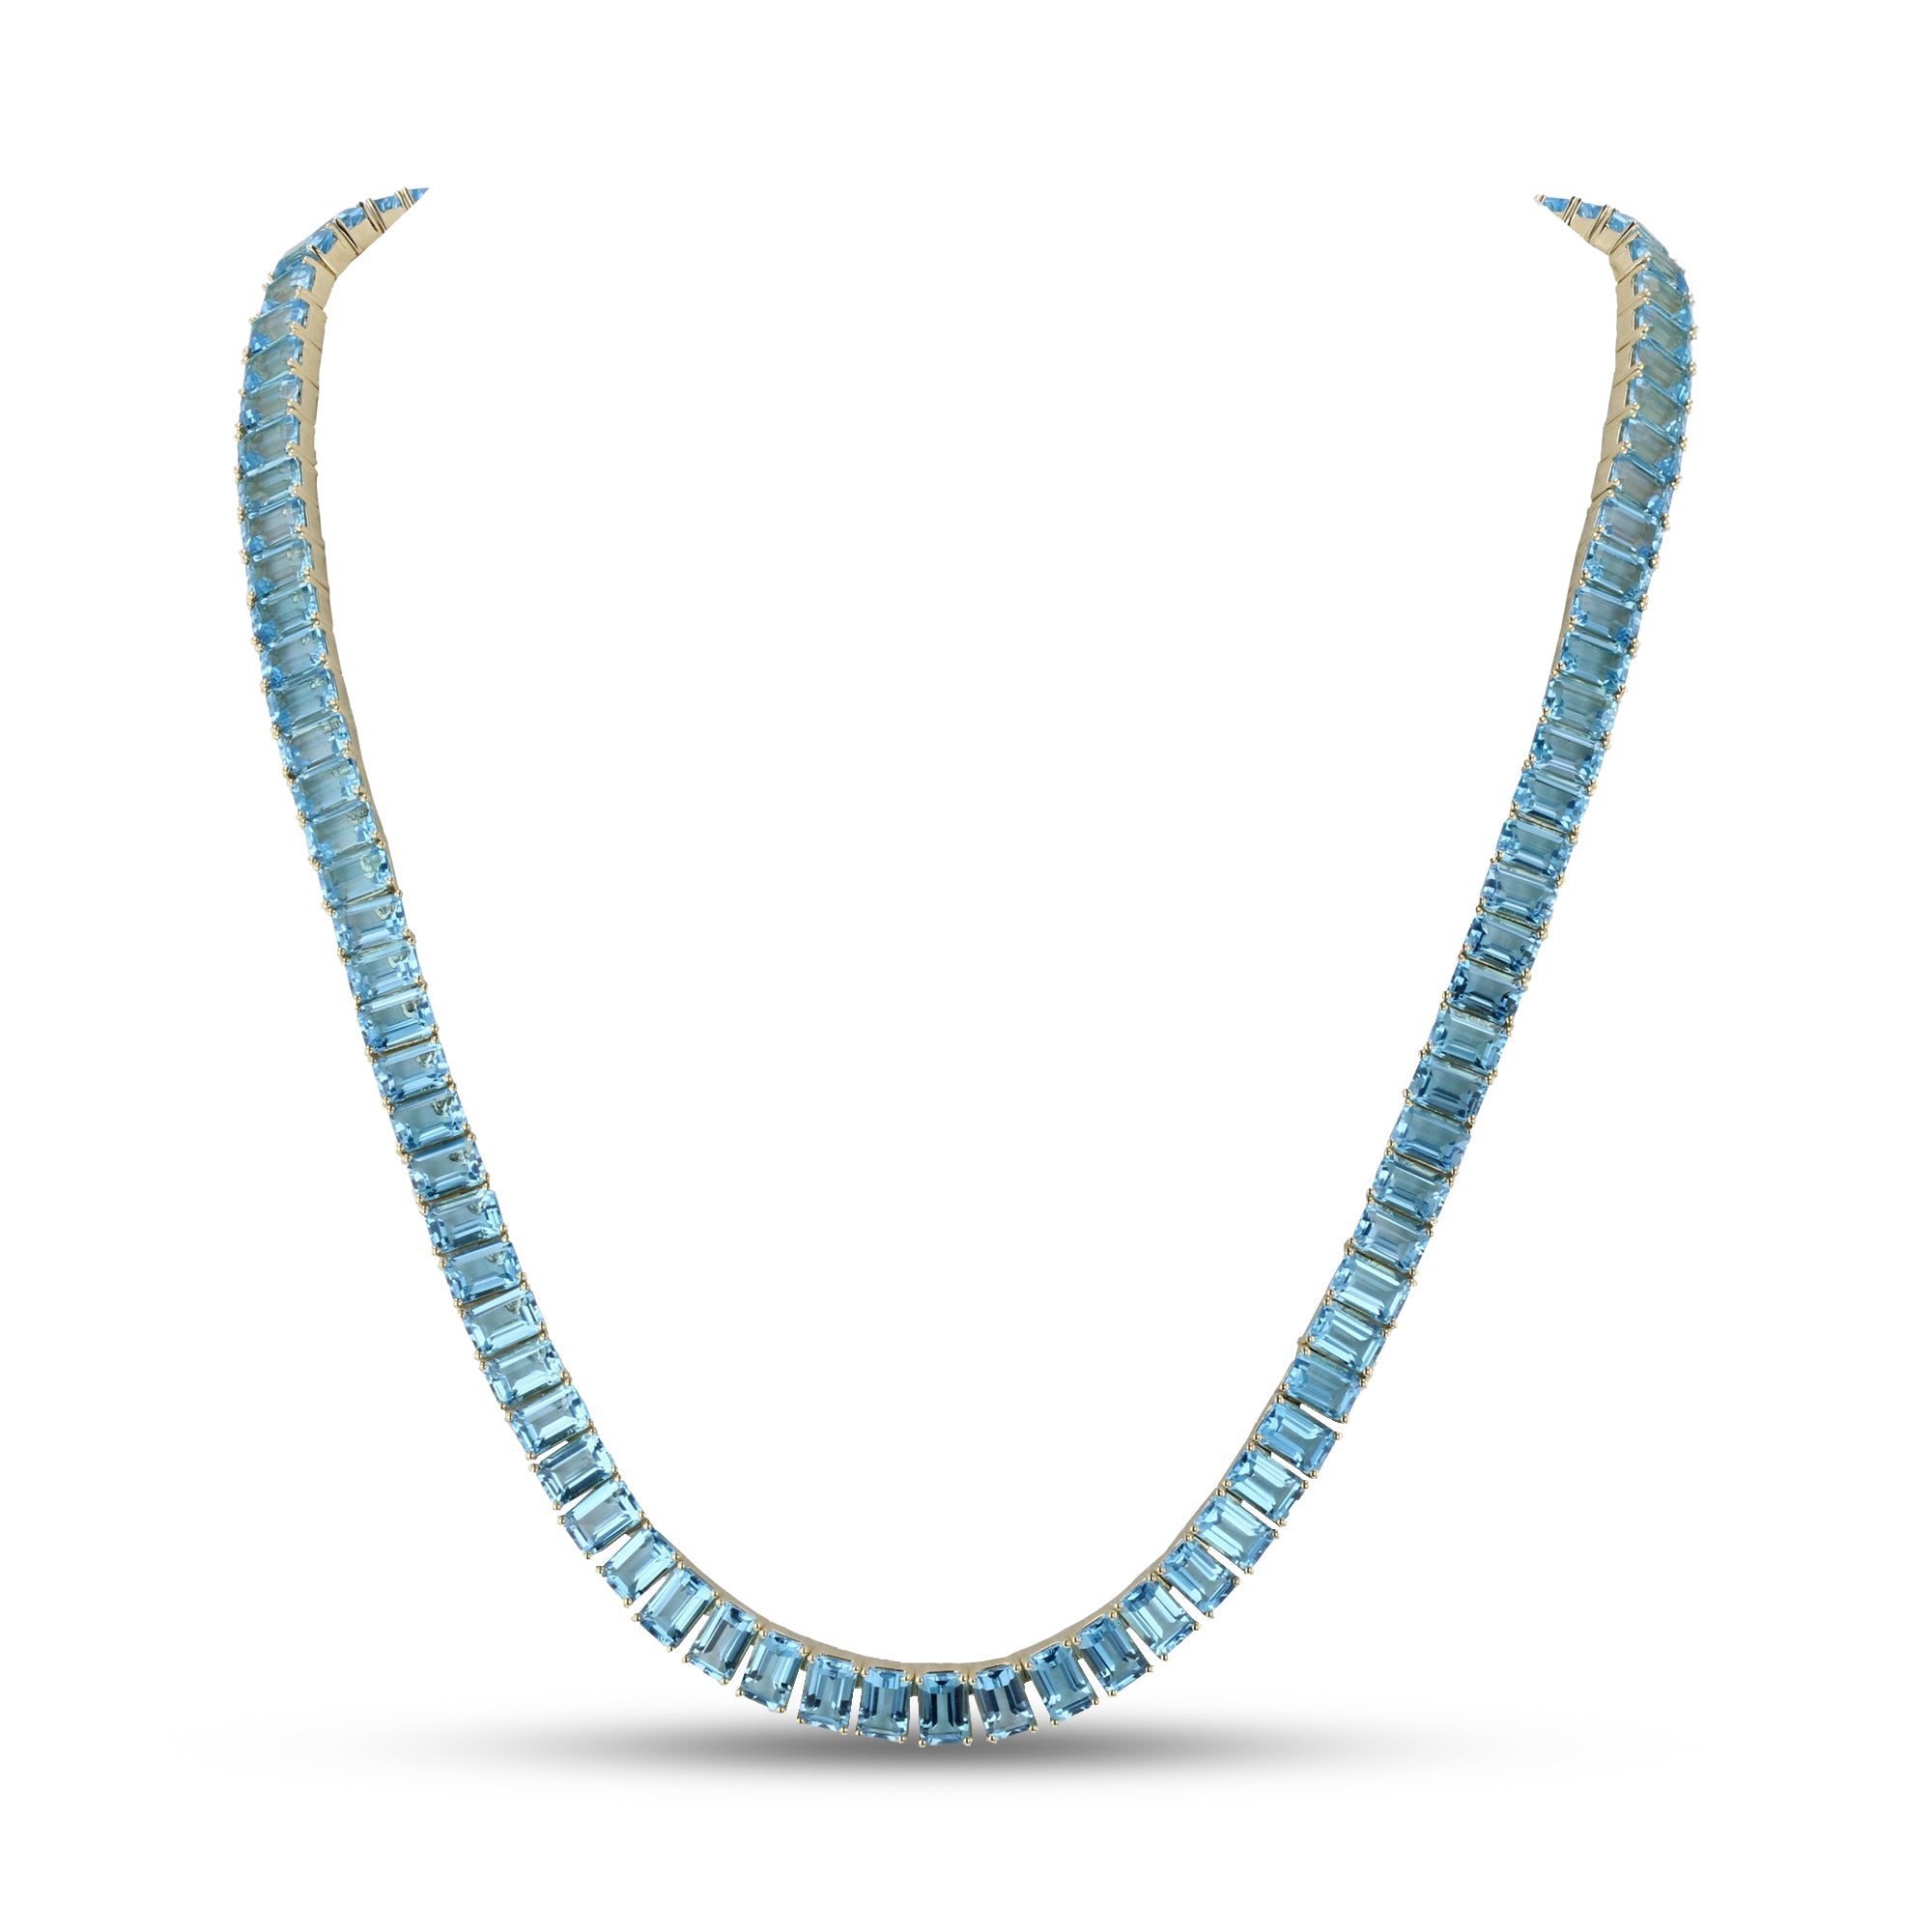 Emerald Cut Blue Topaz Necklace in 14k Yellow Gold 74 c.t.w.